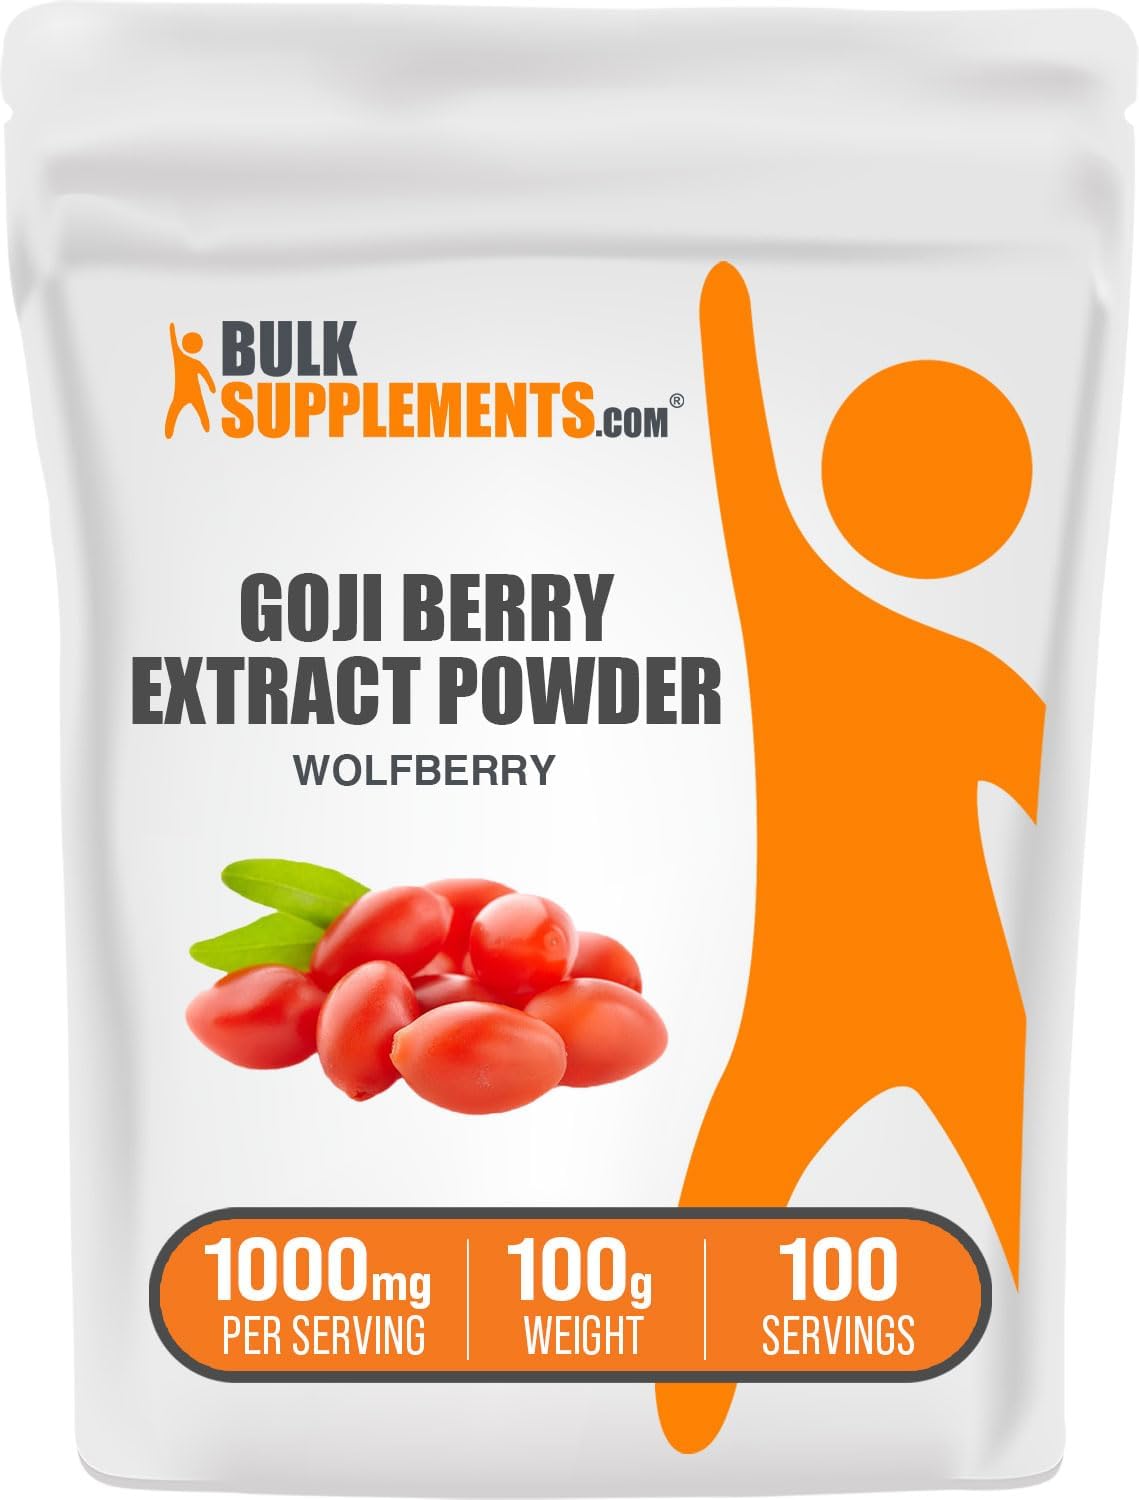 BULKSUPPLEMENTS.COM Wolfberry Extract Powder - Herbal Supplement, Goji Berry Extract - Gluten Free - 1000mg per Serving, 100 Servings (100 Grams - 3.5 oz)